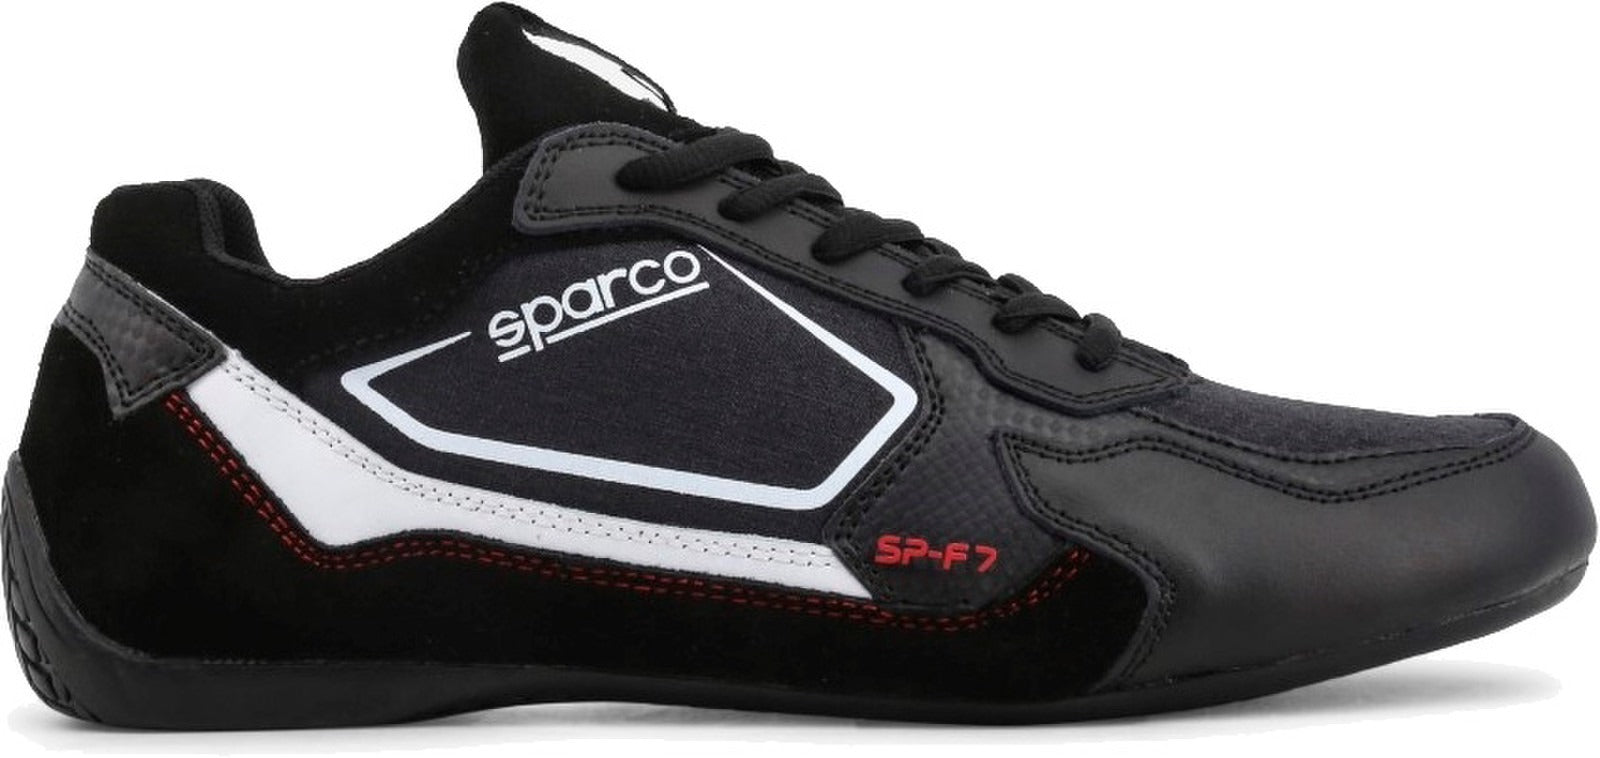 Sparco SP F7 Shoes at Competition Motorsport – competitionmotorsport.com